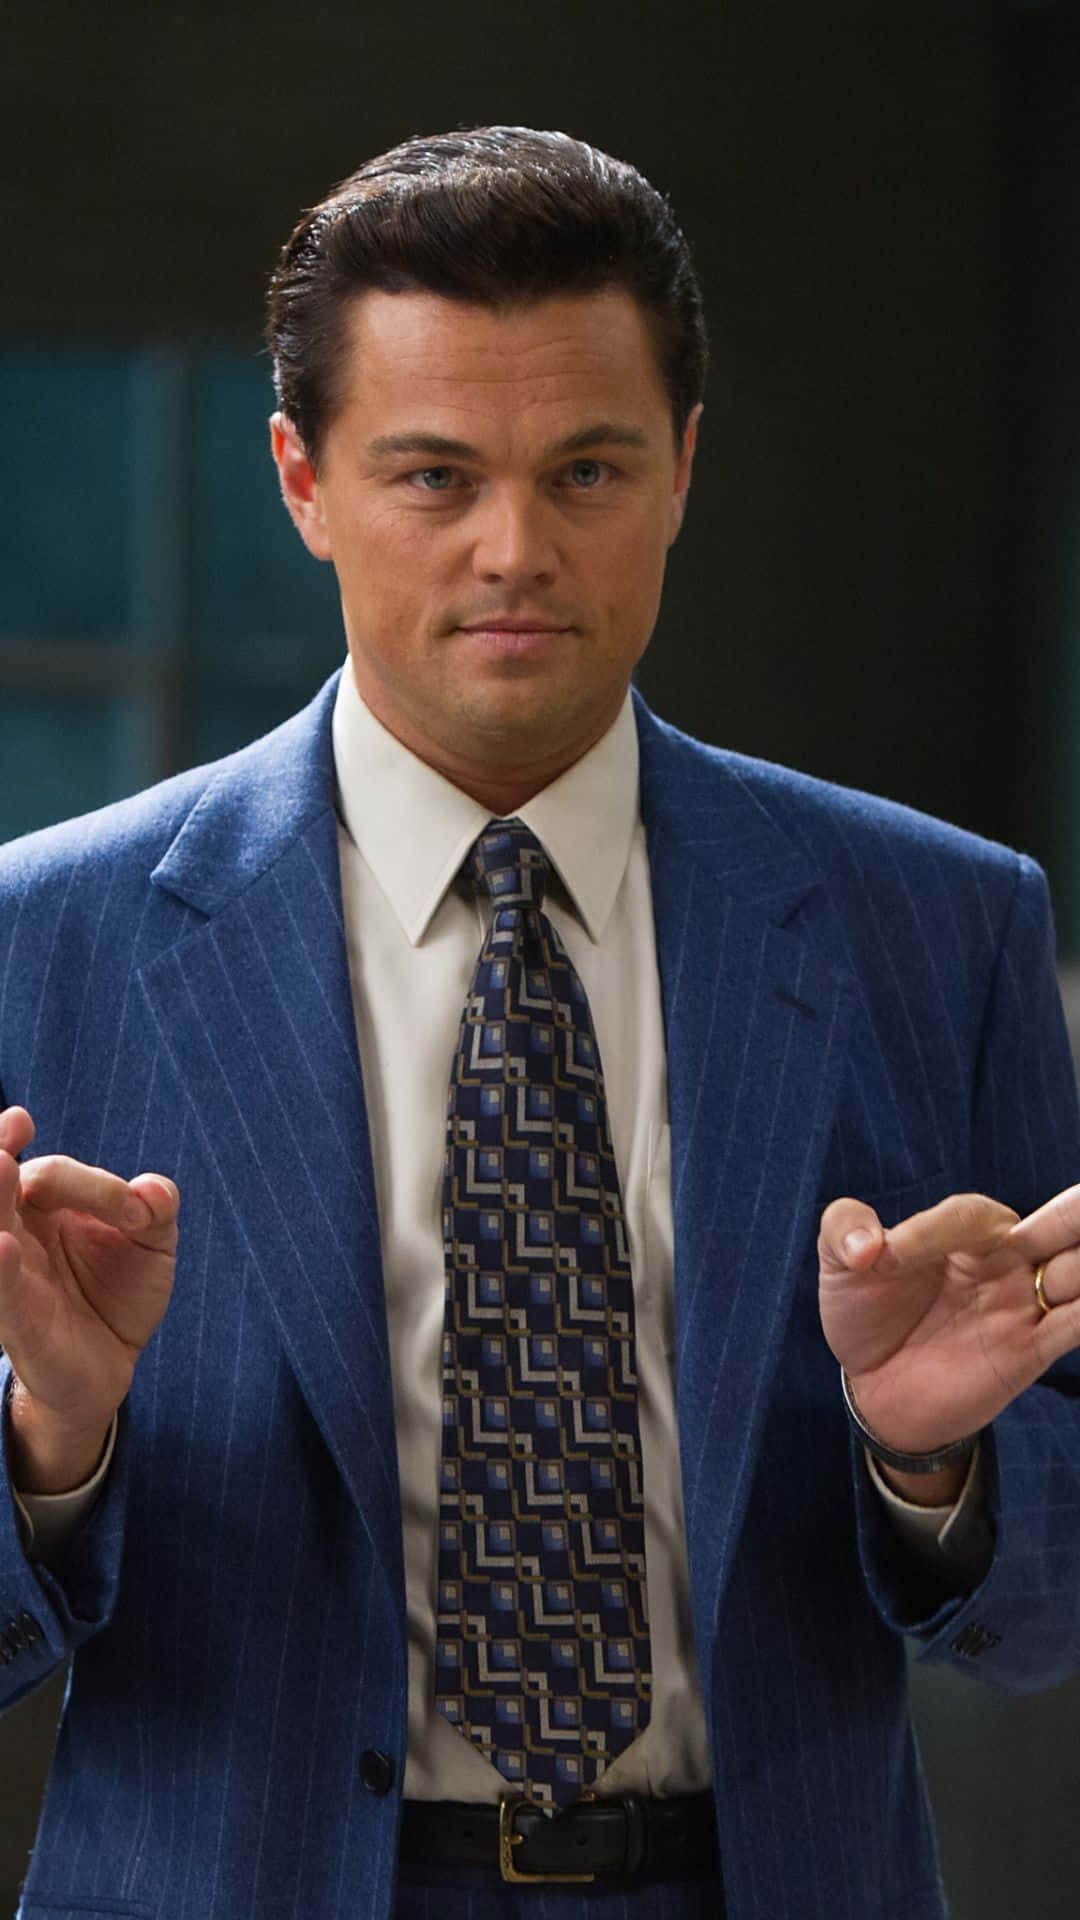 Leonardo DiCaprio embracing his iconic role as Jordan Belfort in The Wolf Of Wall Street Wallpaper